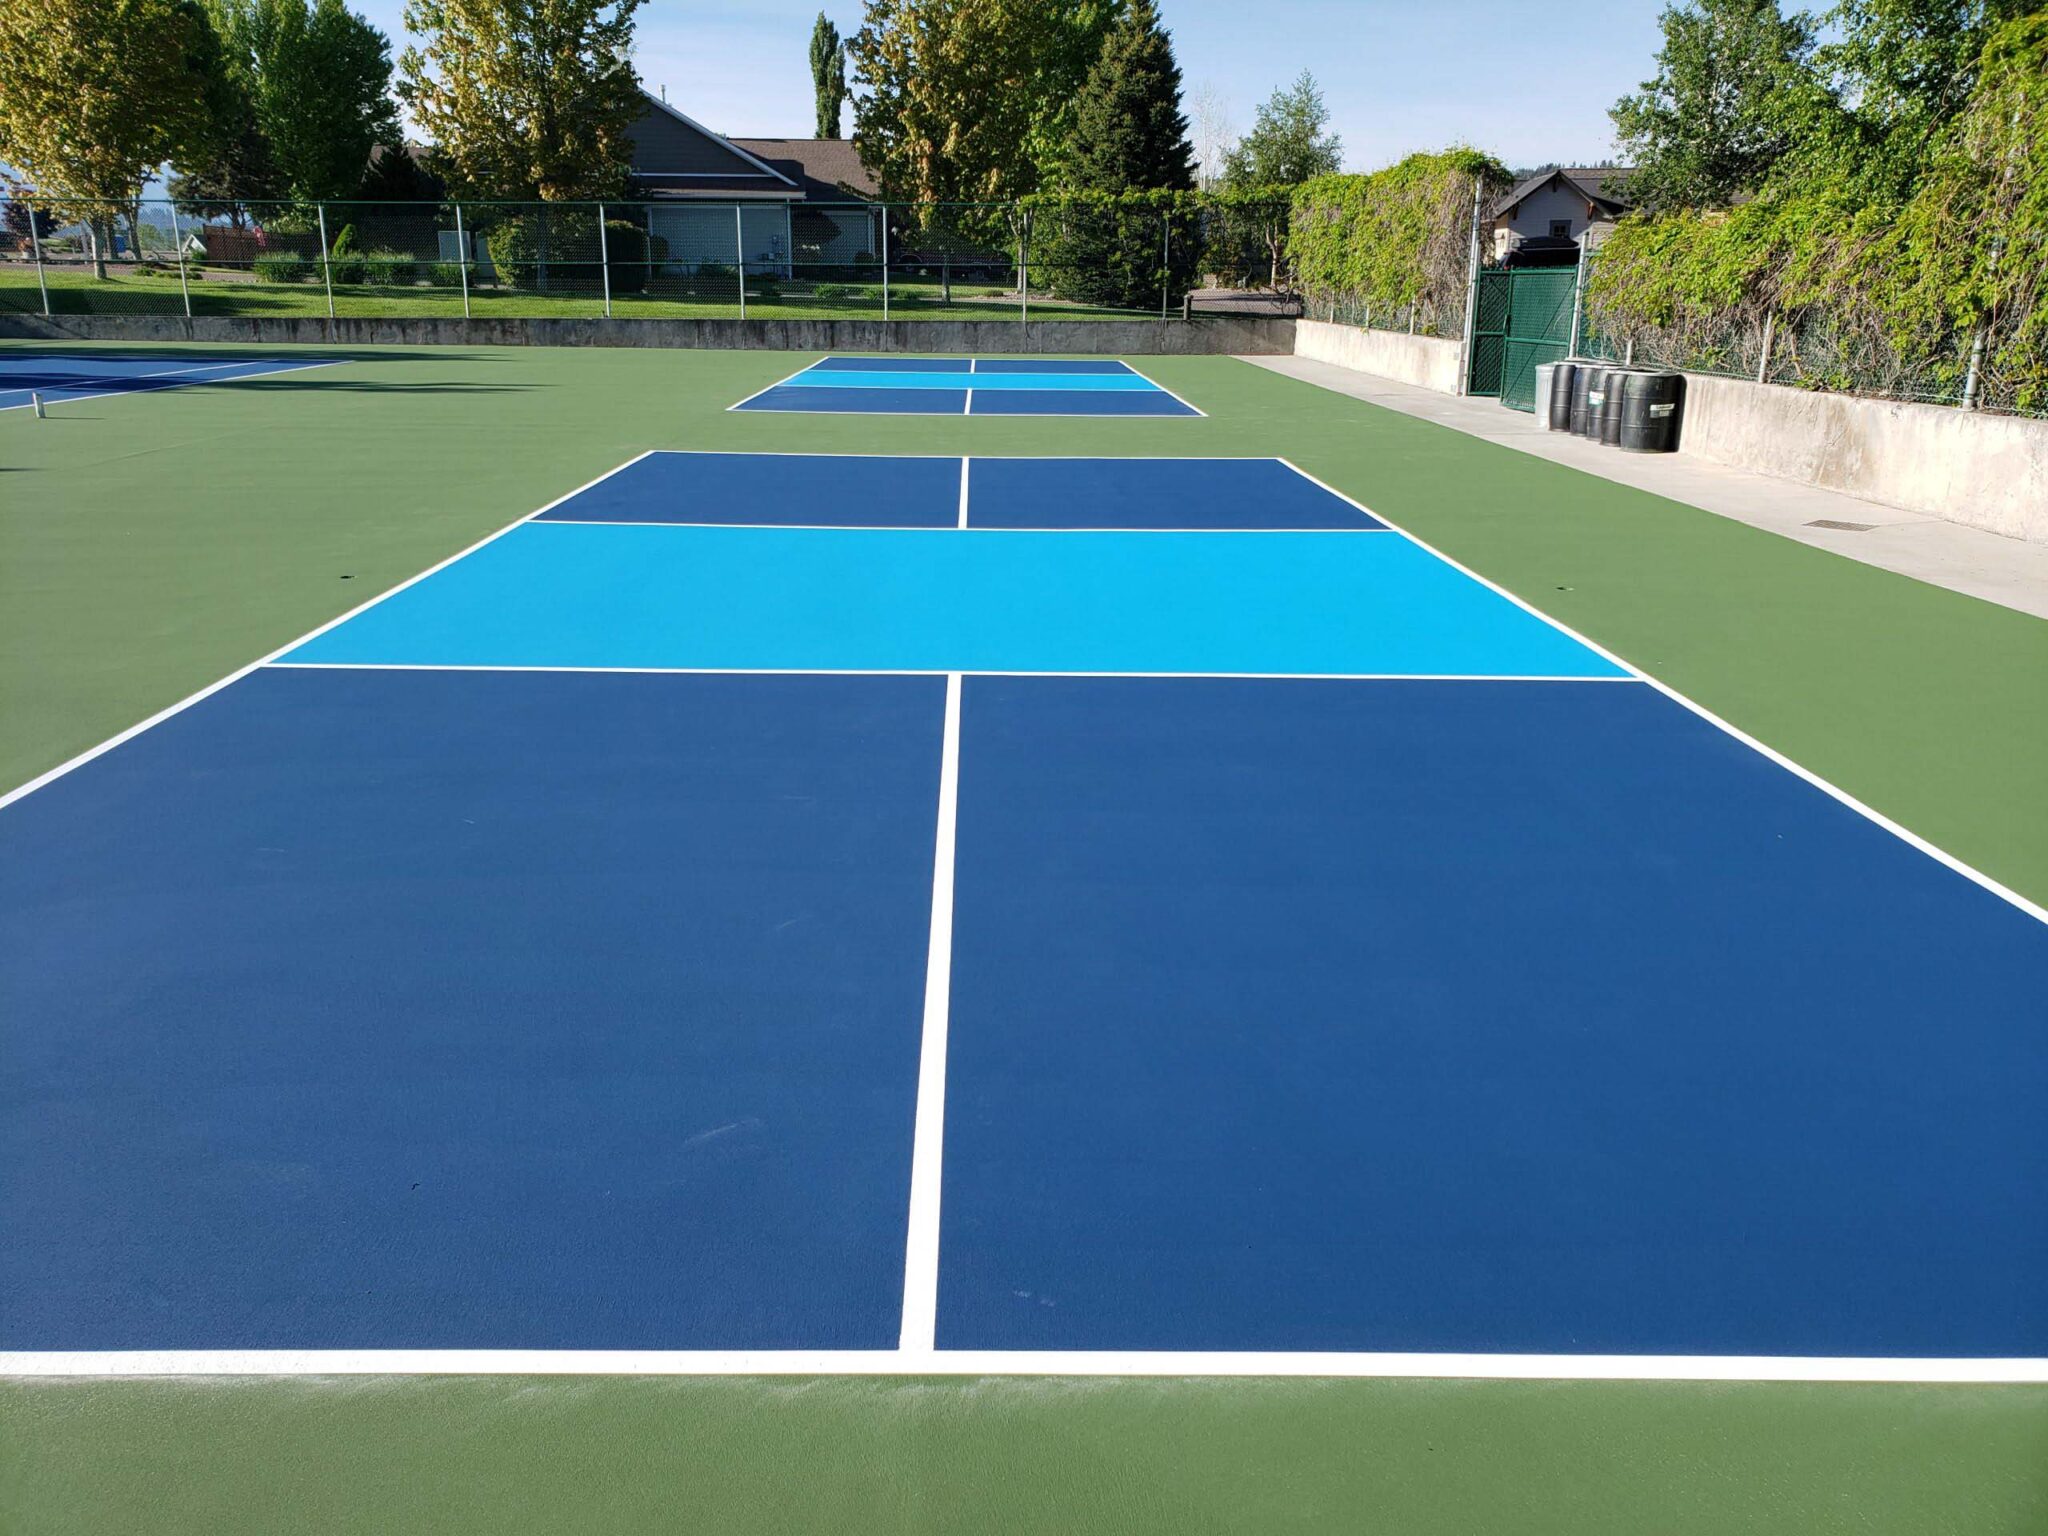 New pickleball courts including fencing and a green, blue and white color shceme.